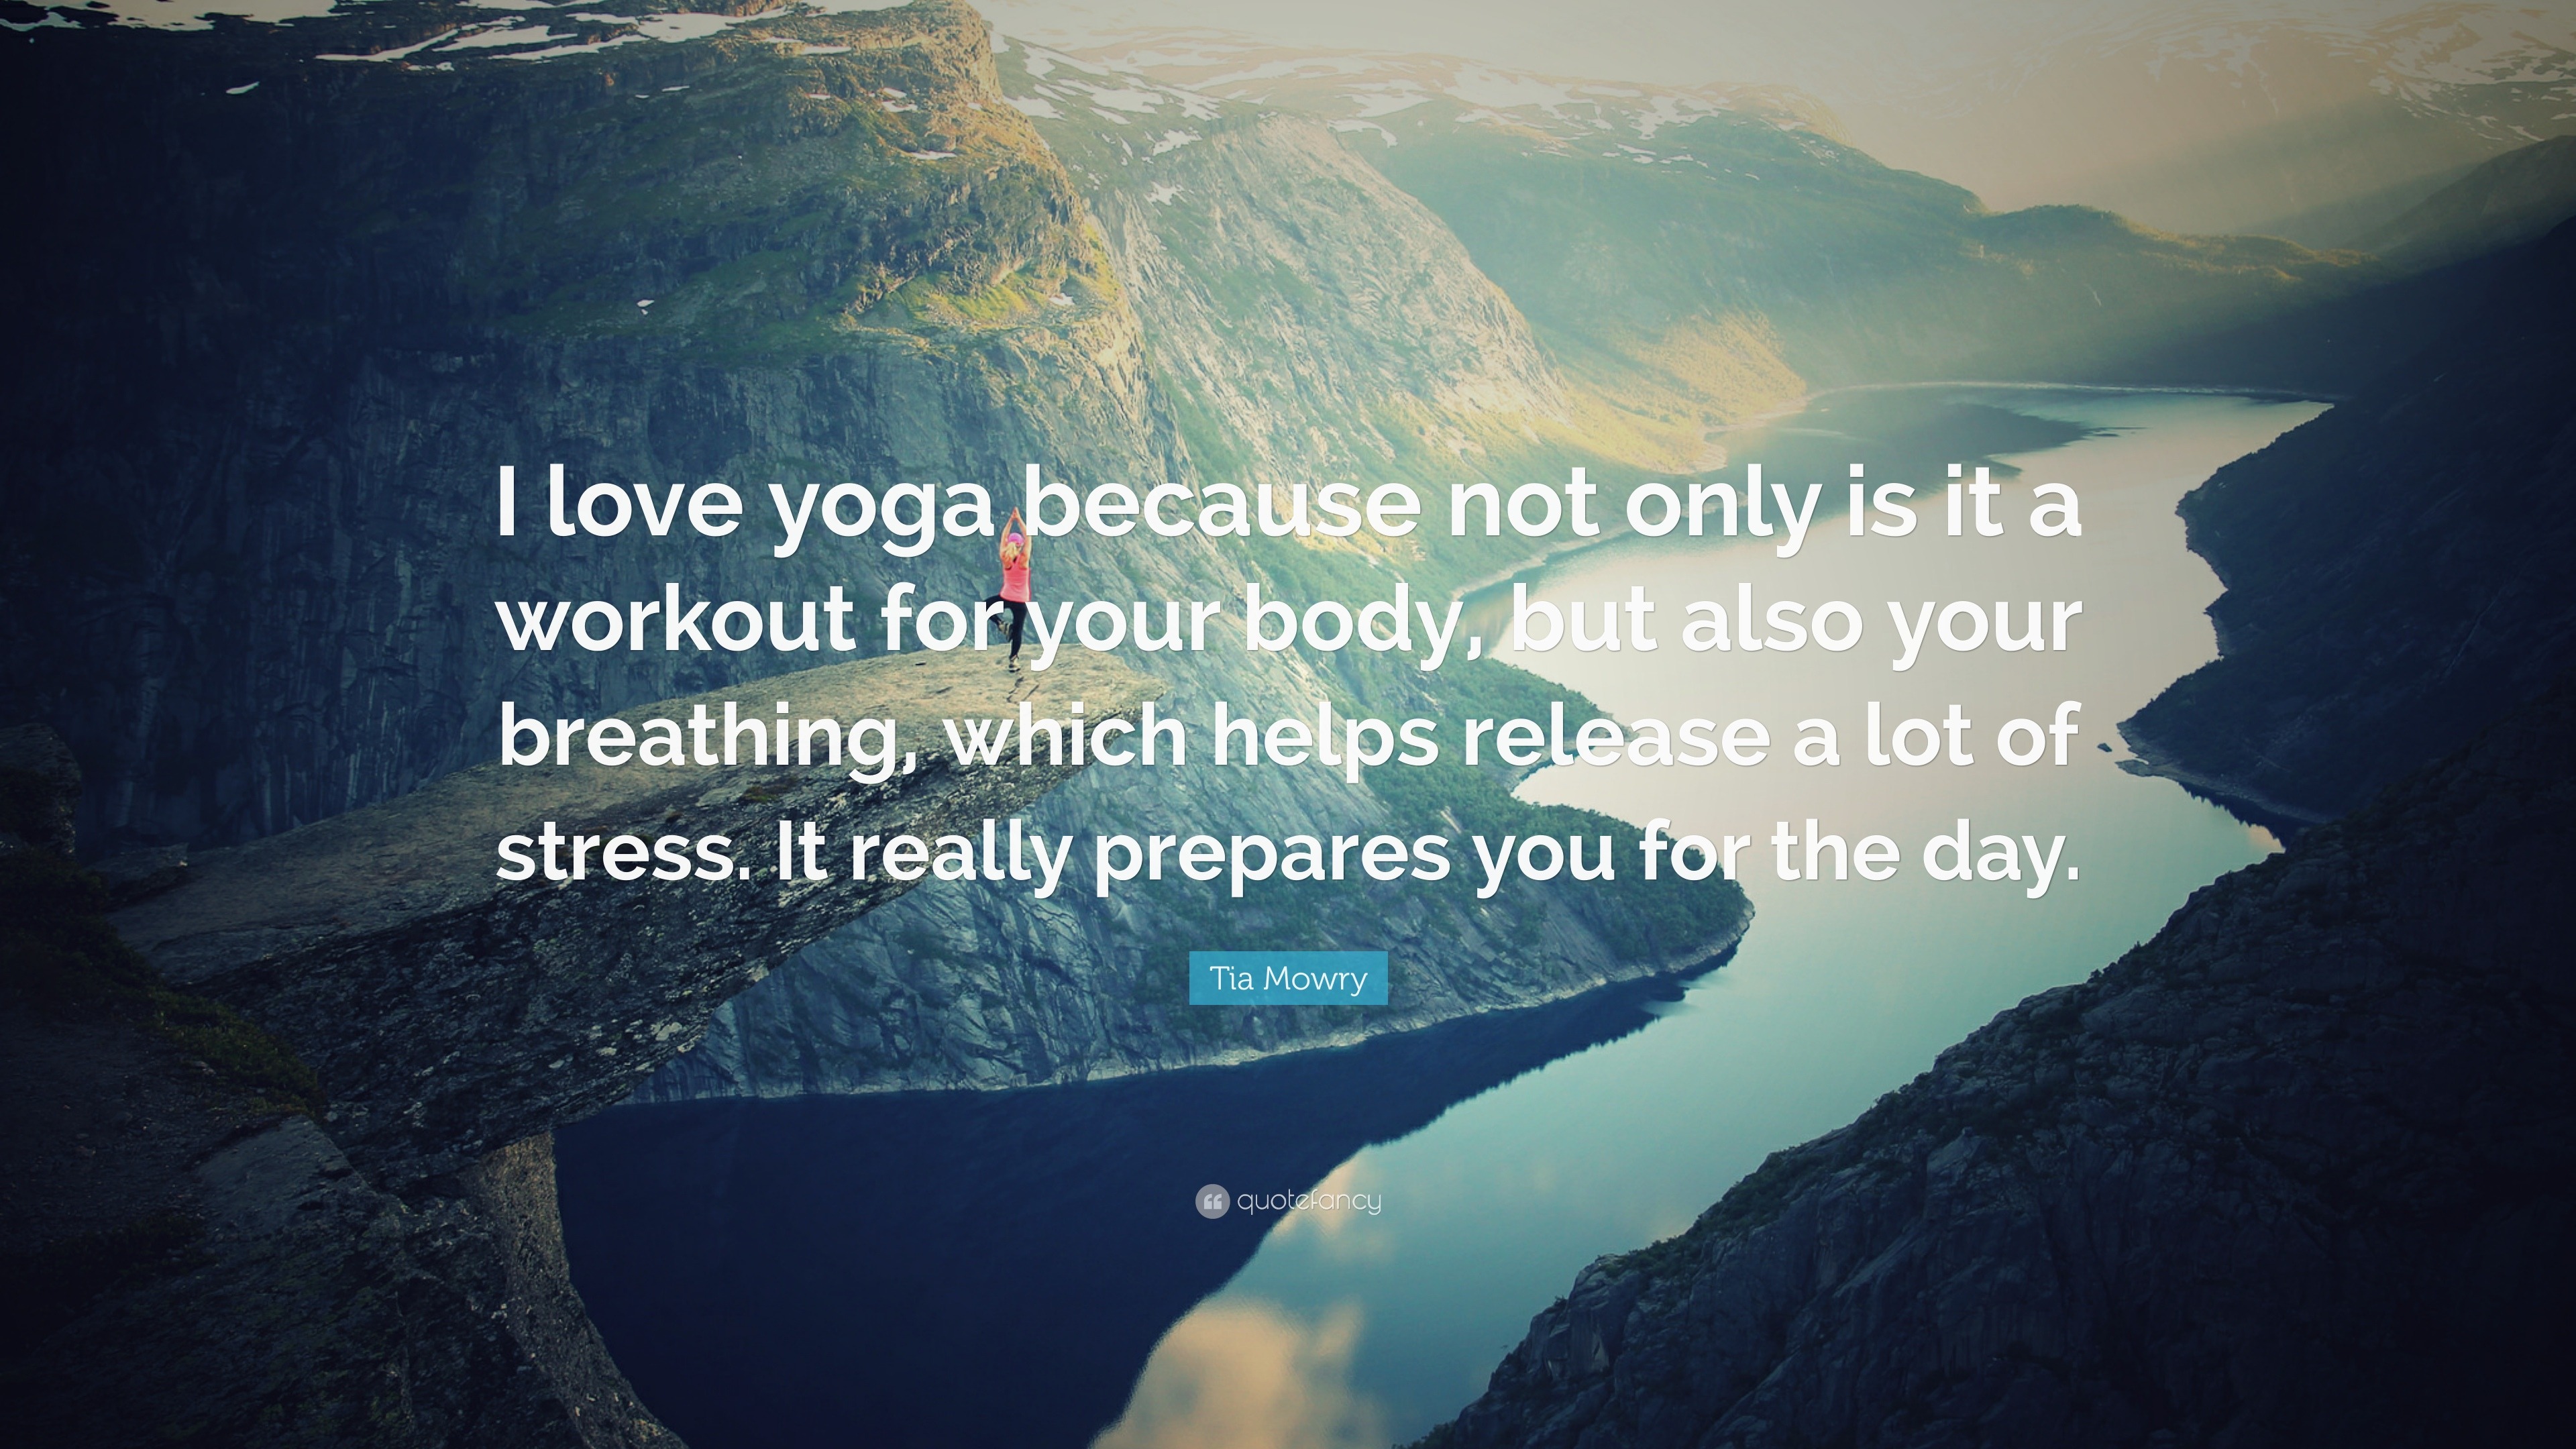 Tia Mowry Quote: “I love yoga because not only is it a workout for